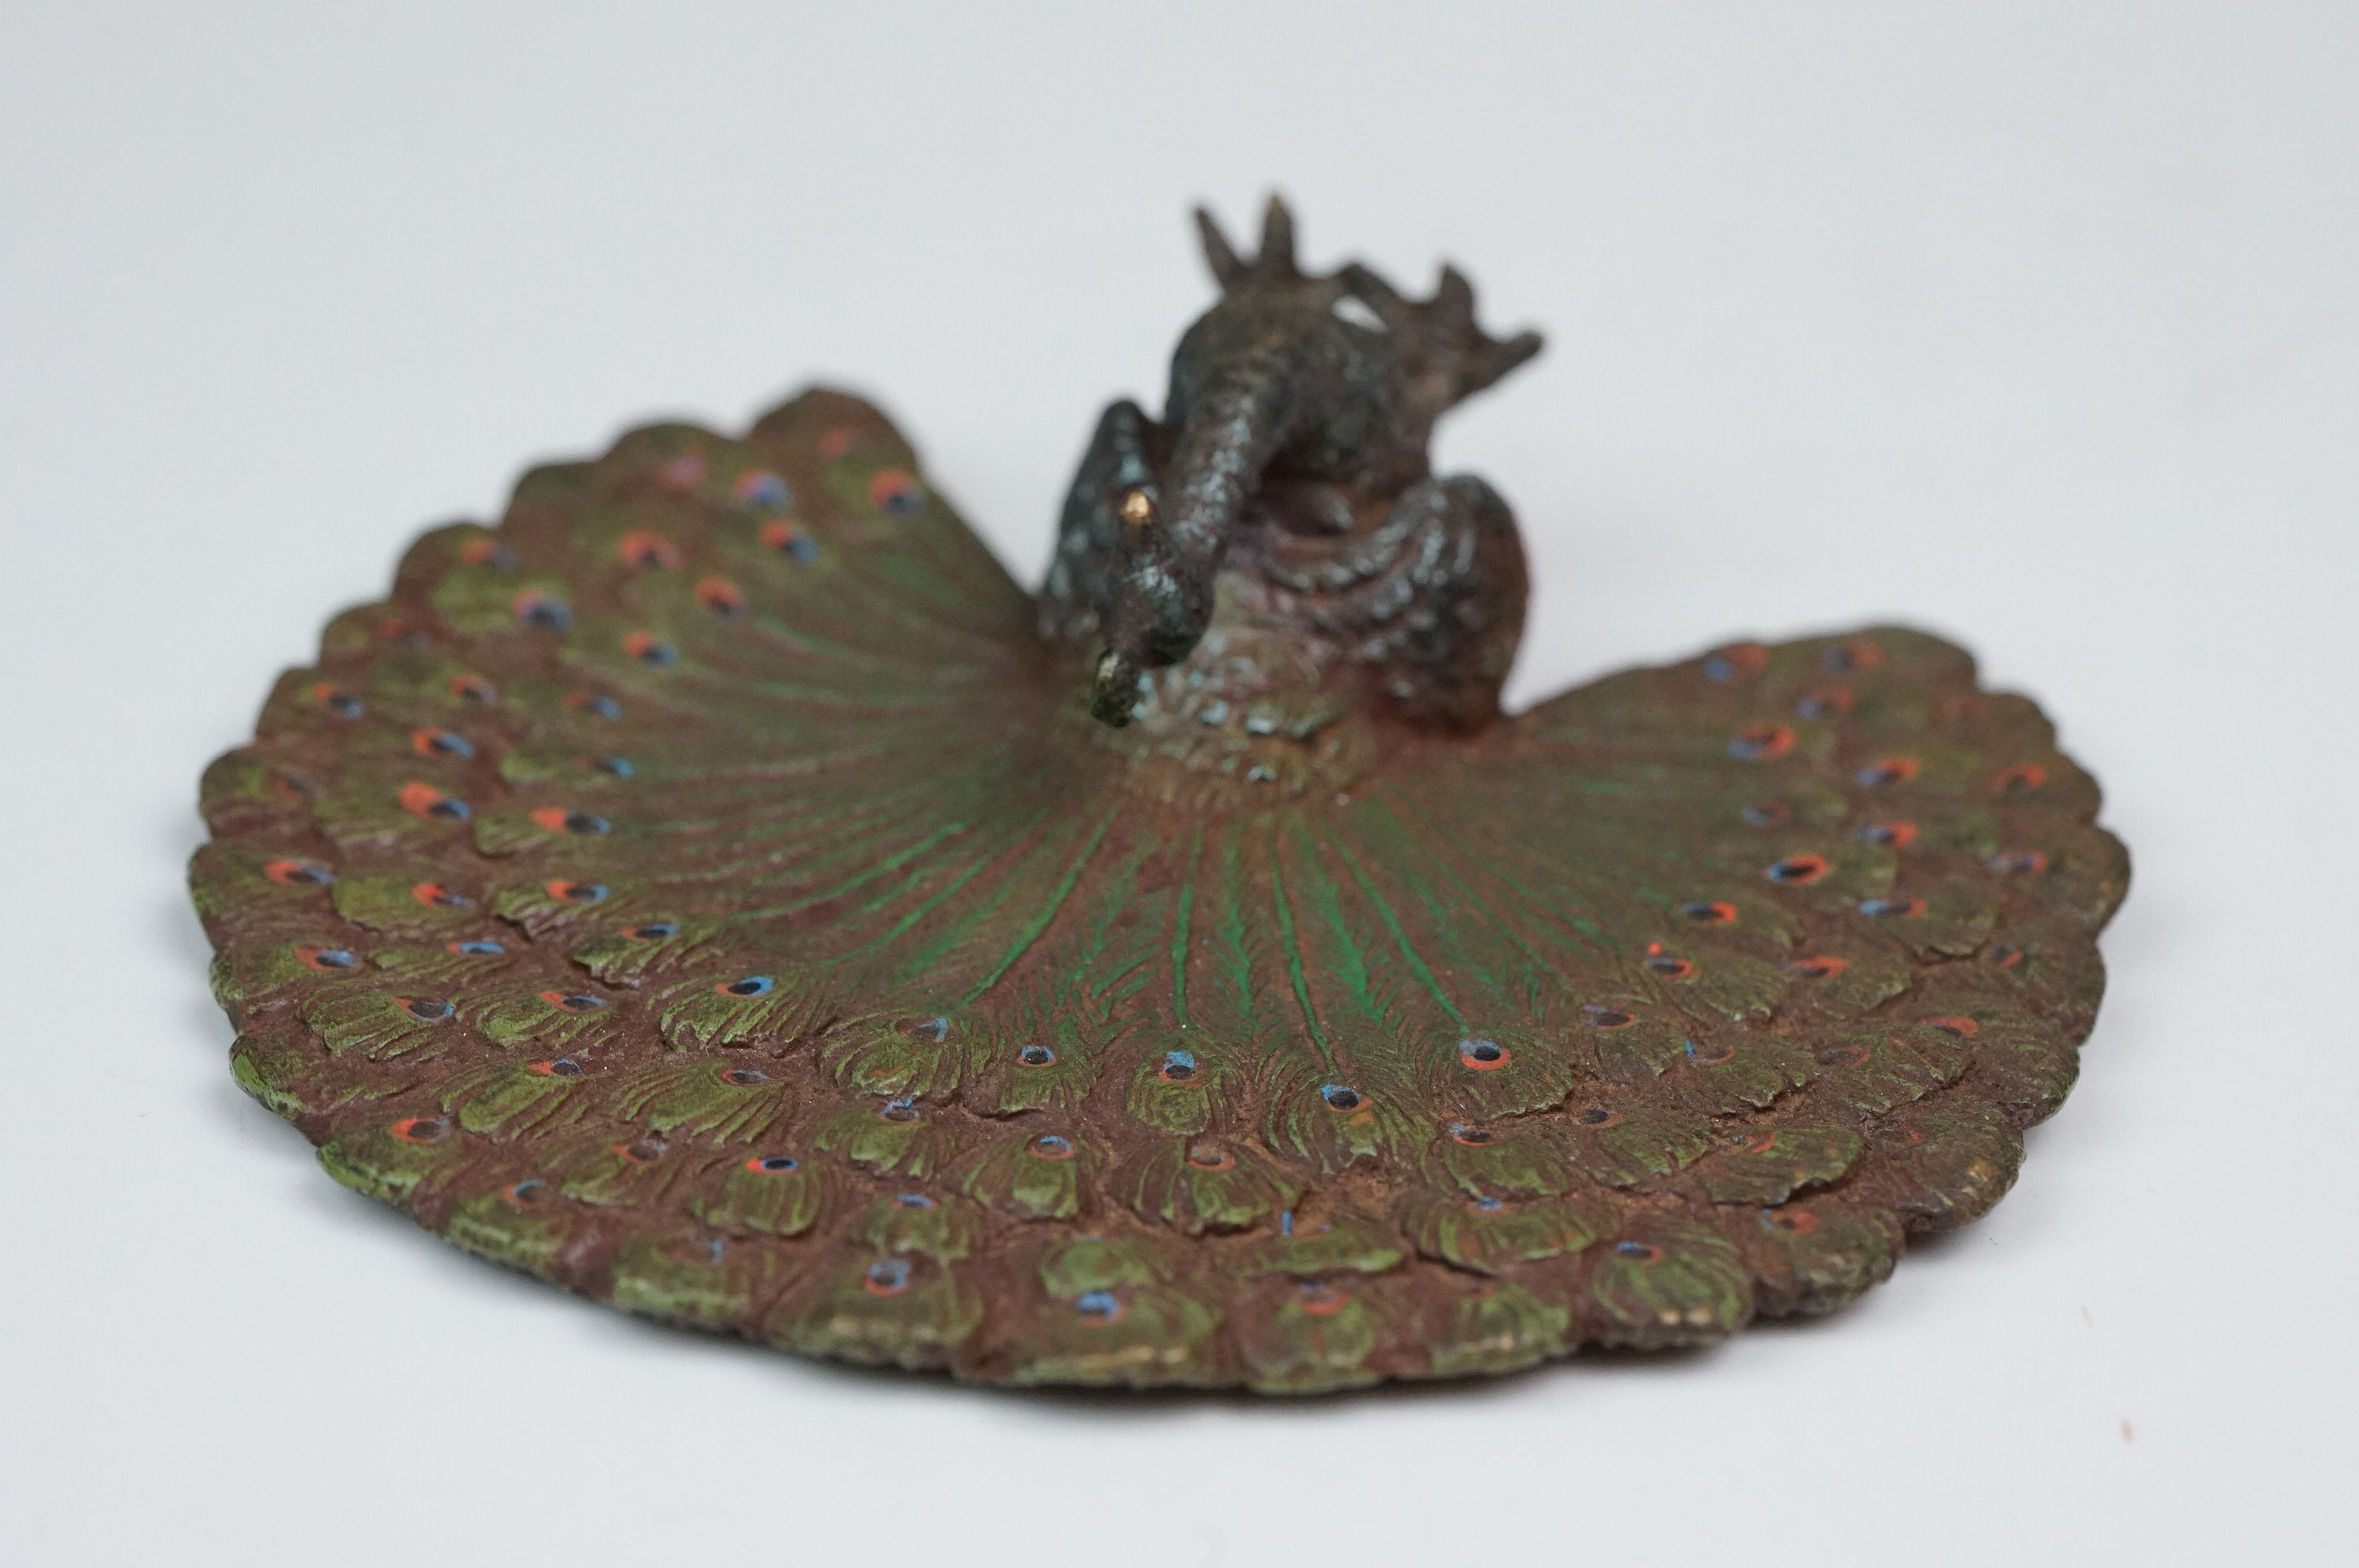 Cold painted bronze figure of a peacock with extended feathers - Image 6 of 6